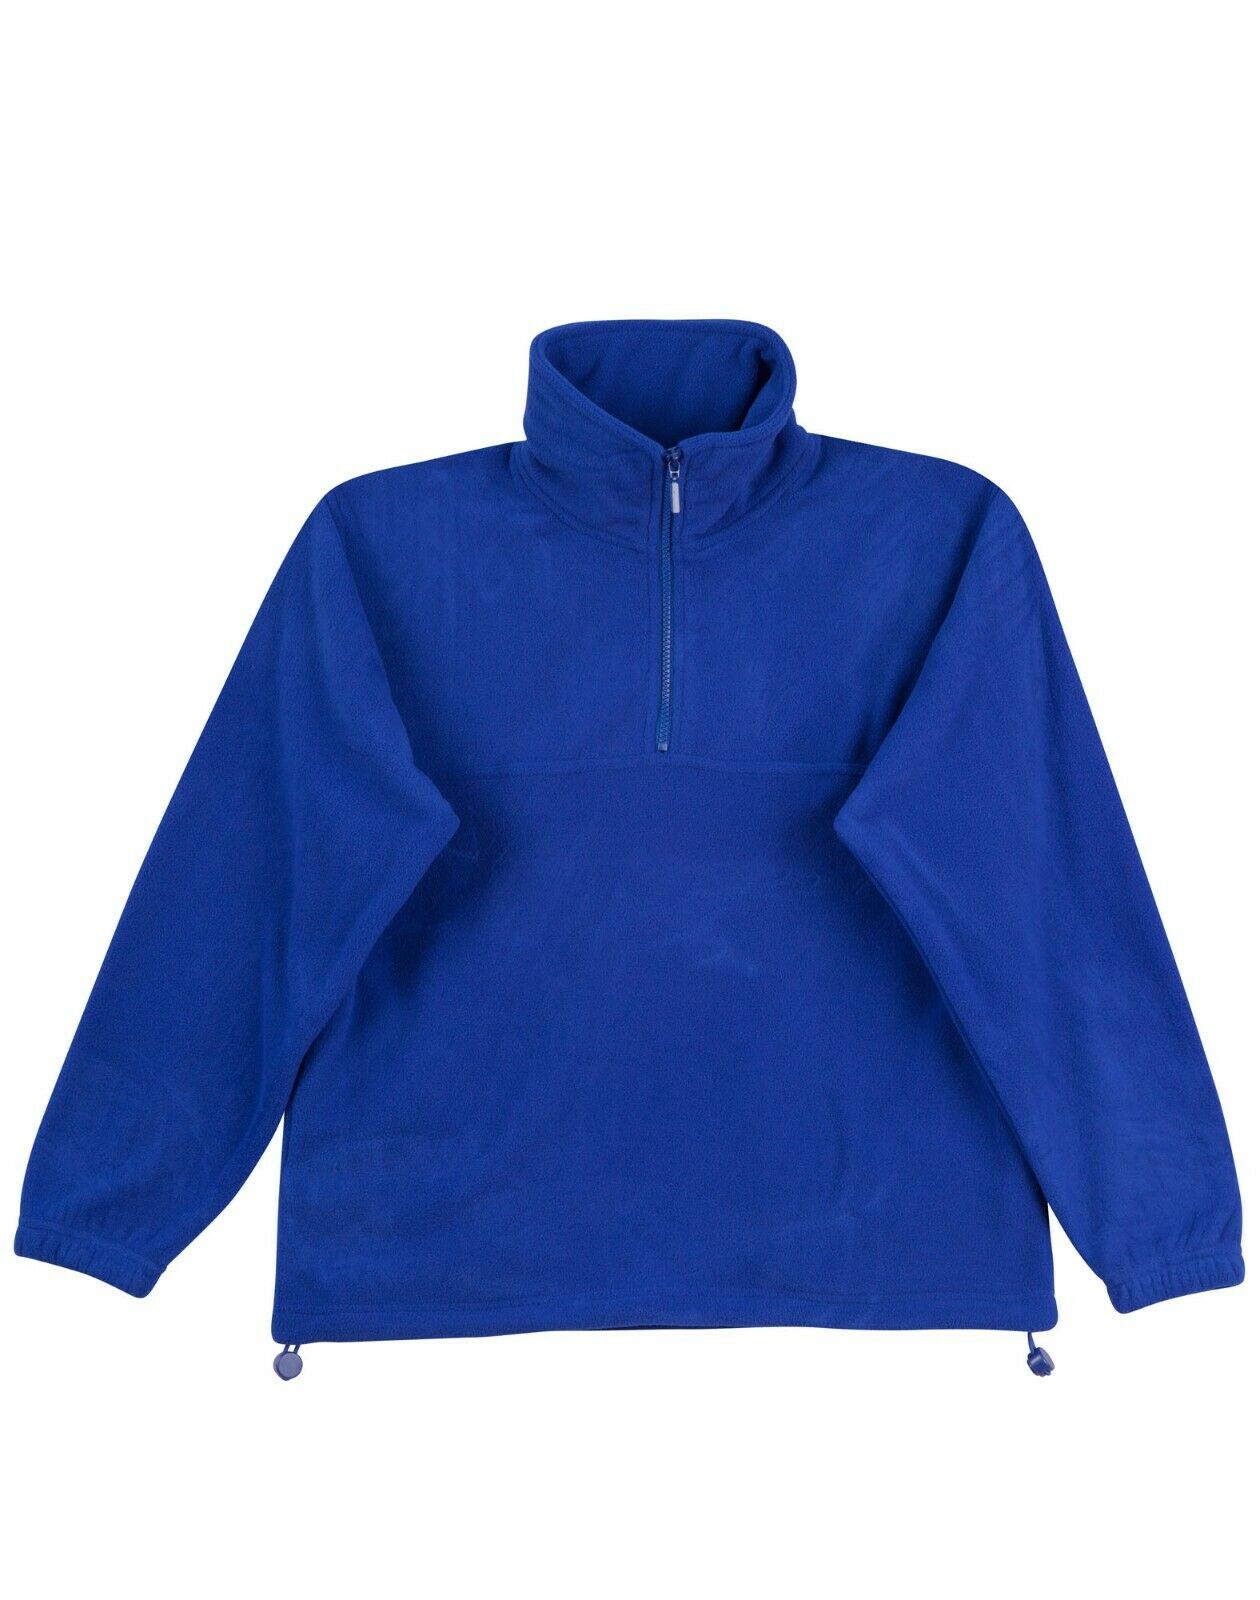 Unisex Buller Close Front Fleece Hoodie Casual Sports Jumper Pullover Top